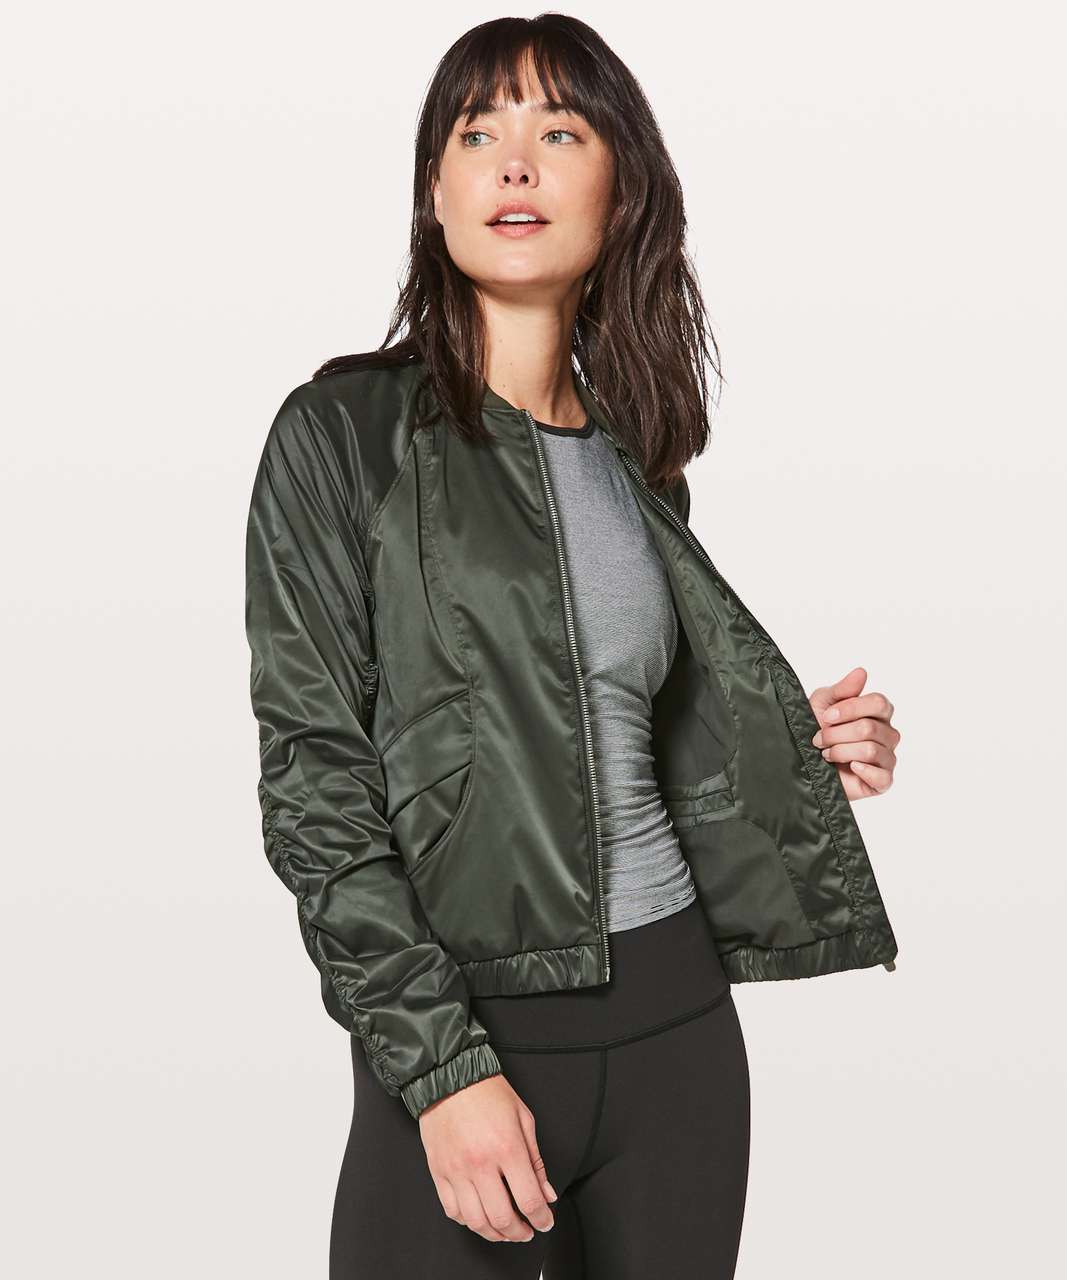 Lululemon Above The Clouds Jacket - Evergreen